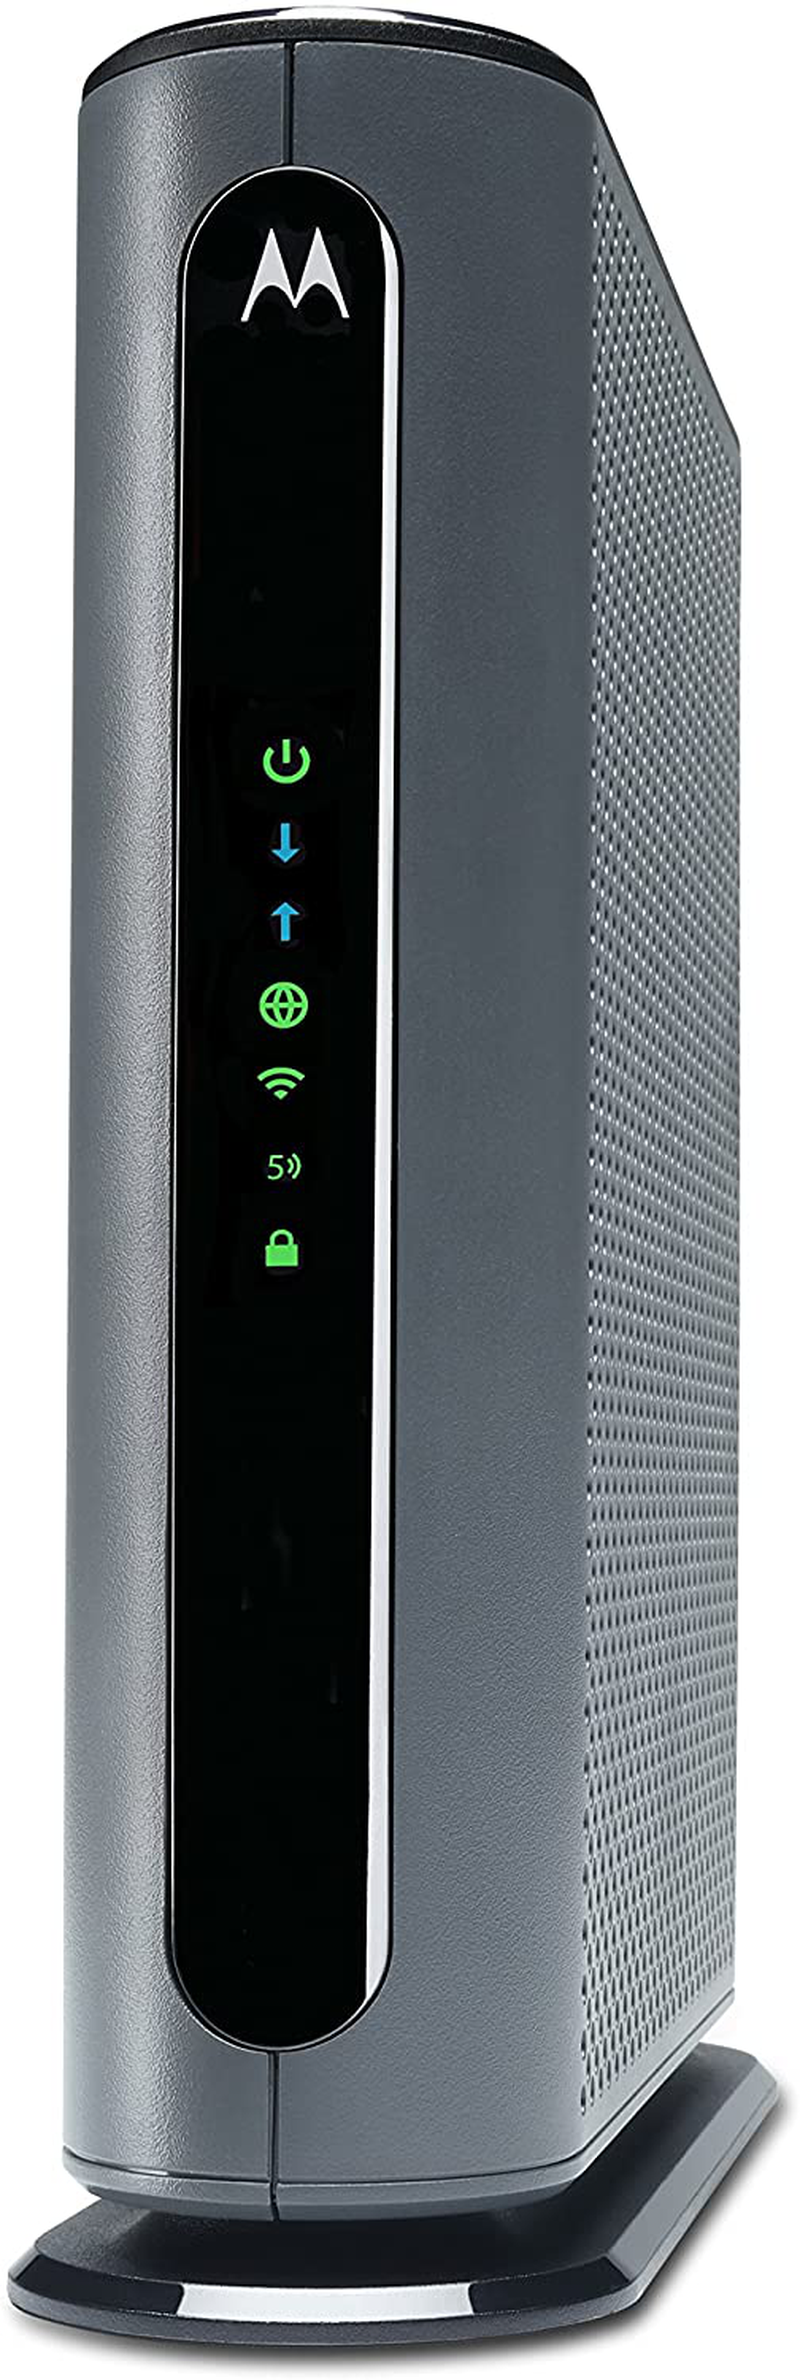 Motorola MG7700 24x8 Cable Modem Plus AC1900 Dual Band WiFi Gigabit Router with Power Boost, 1000 Mbps Maximum Docsis 3.0 - Approved by Comcast Xfinity, Cox and More Electronics > Networking > Modems Motorola Wifi 5 + DOCSIS 3.0  